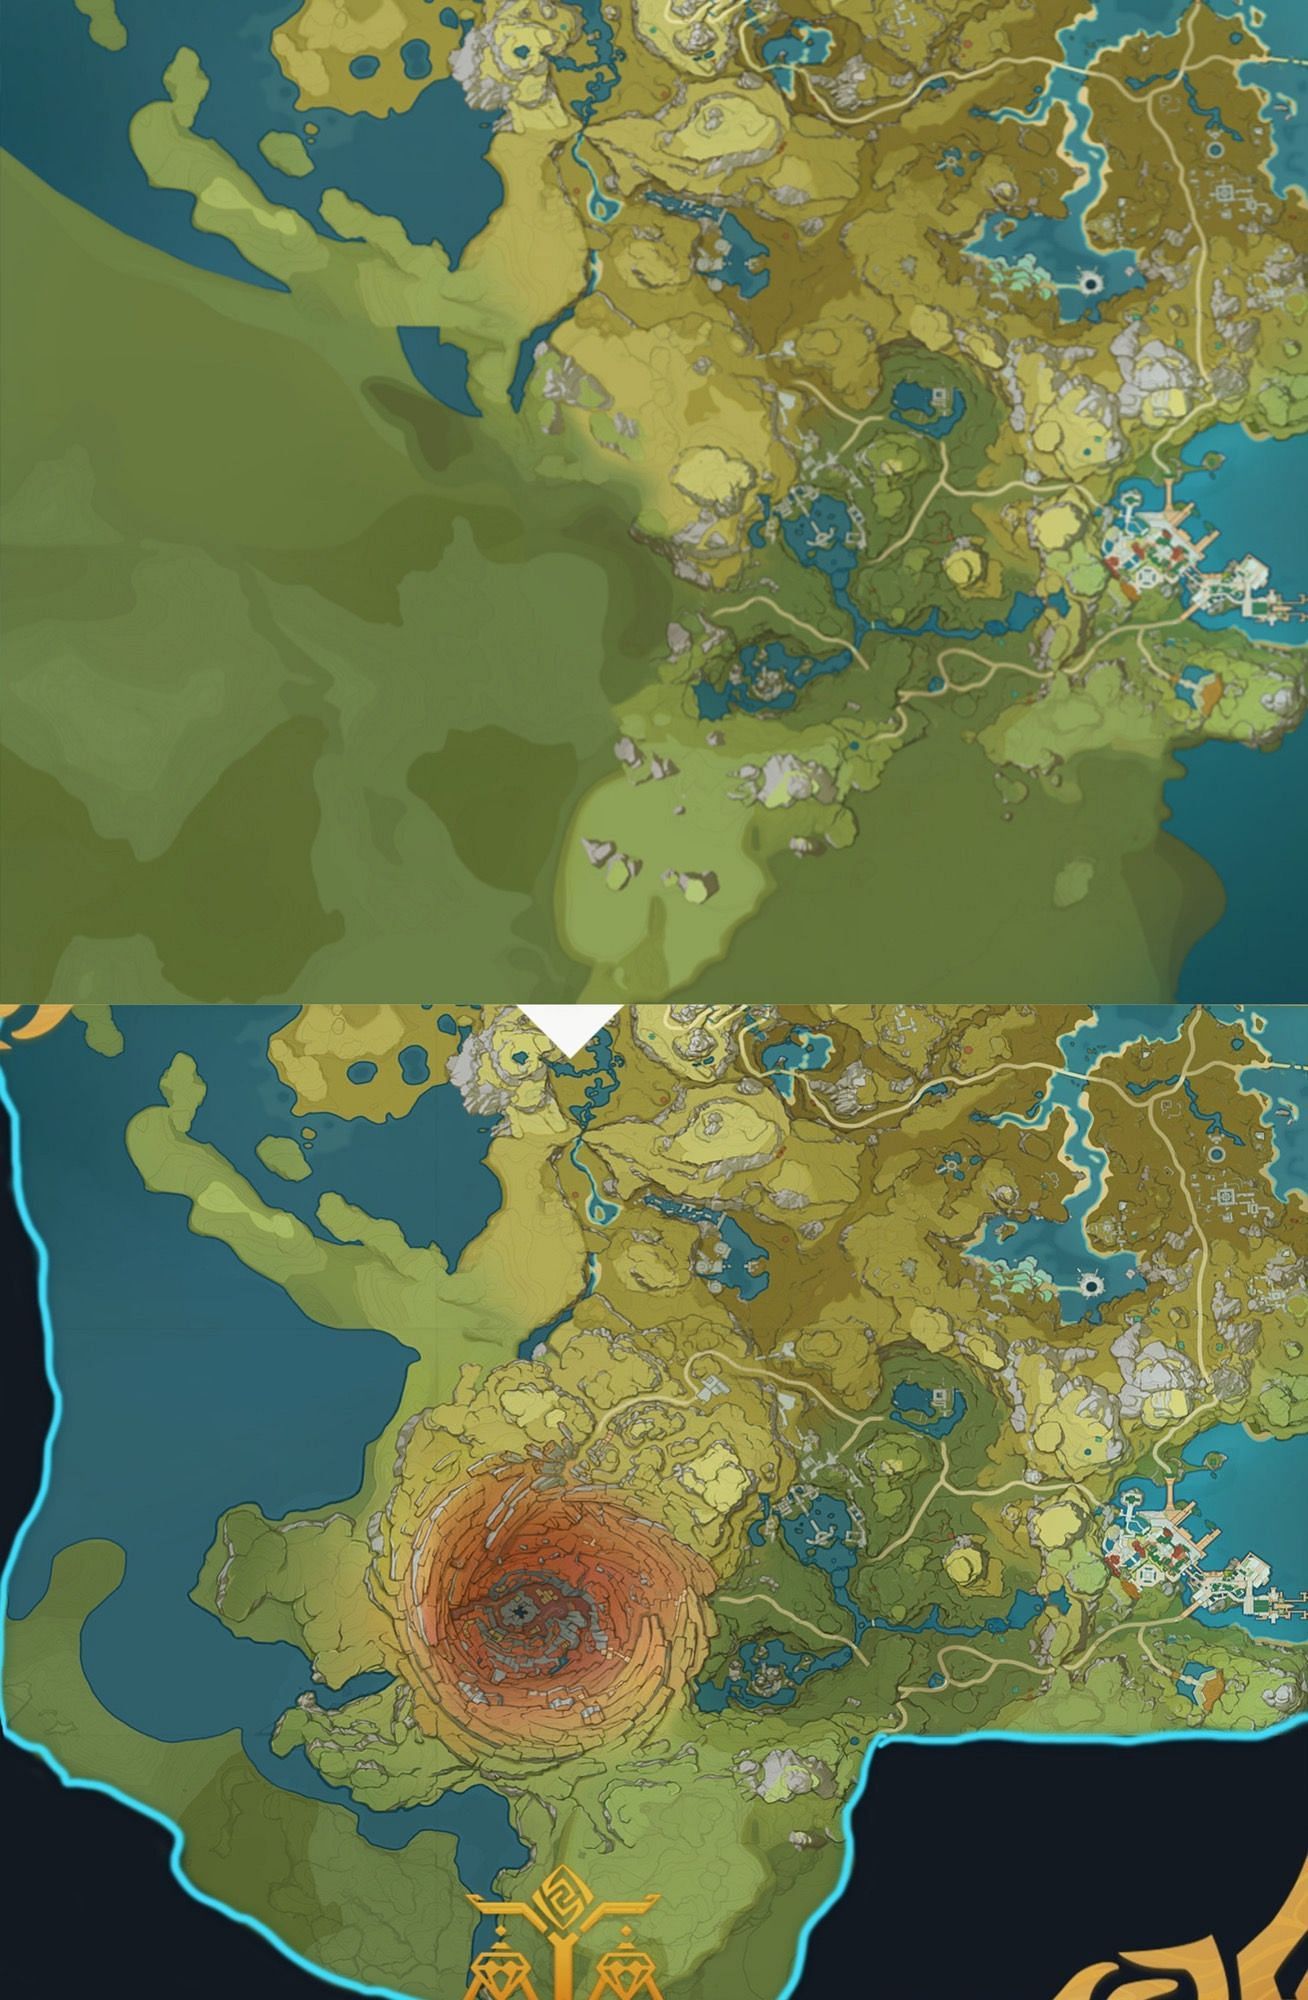 A before and after shot of the region (Image via miHoYo)